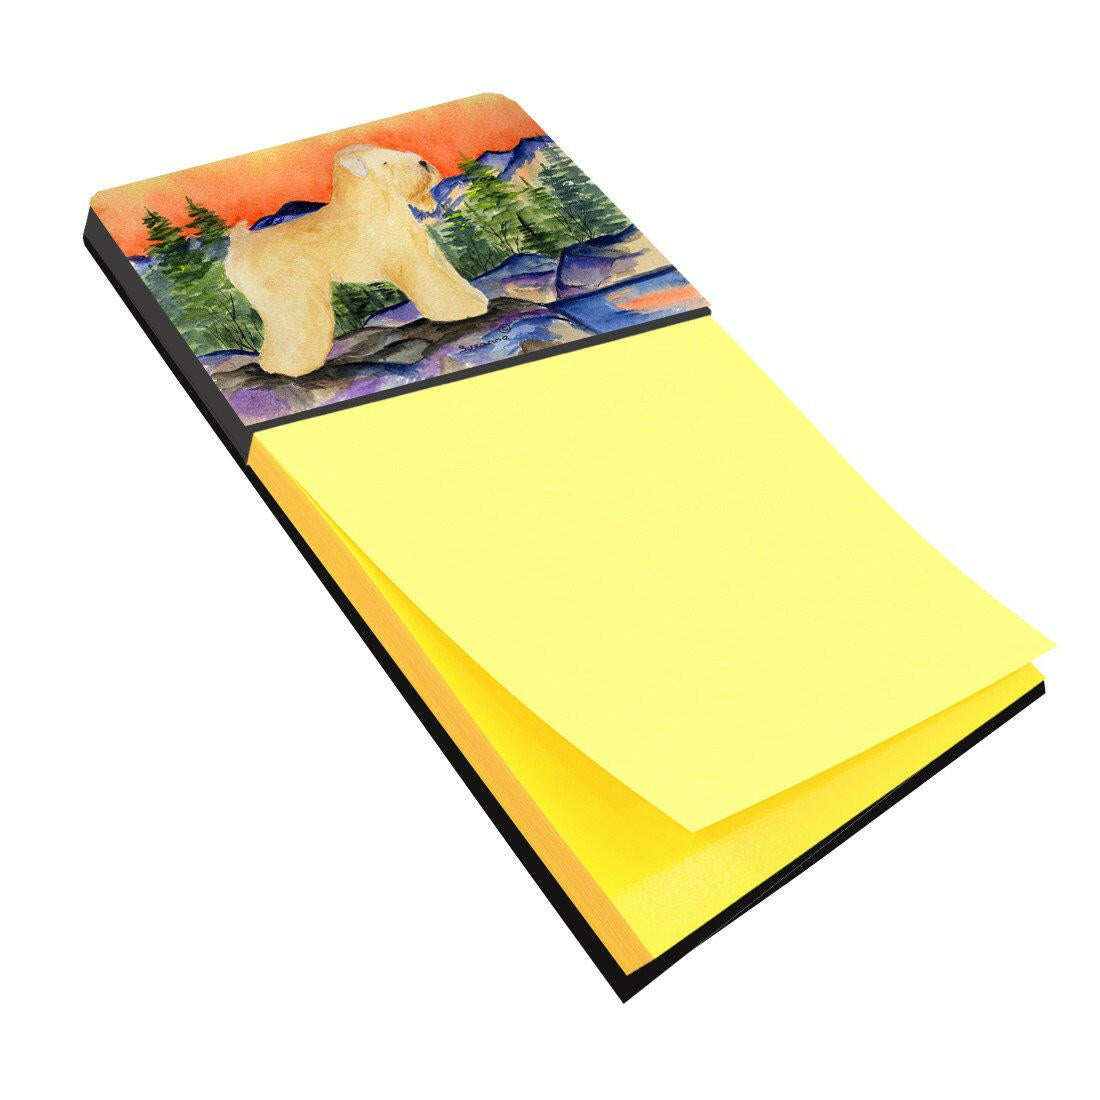 Wheaten Terrier Soft Coated Refiillable Sticky Note Holder or Postit Note Dispenser SS8182SN by Caroline's Treasures